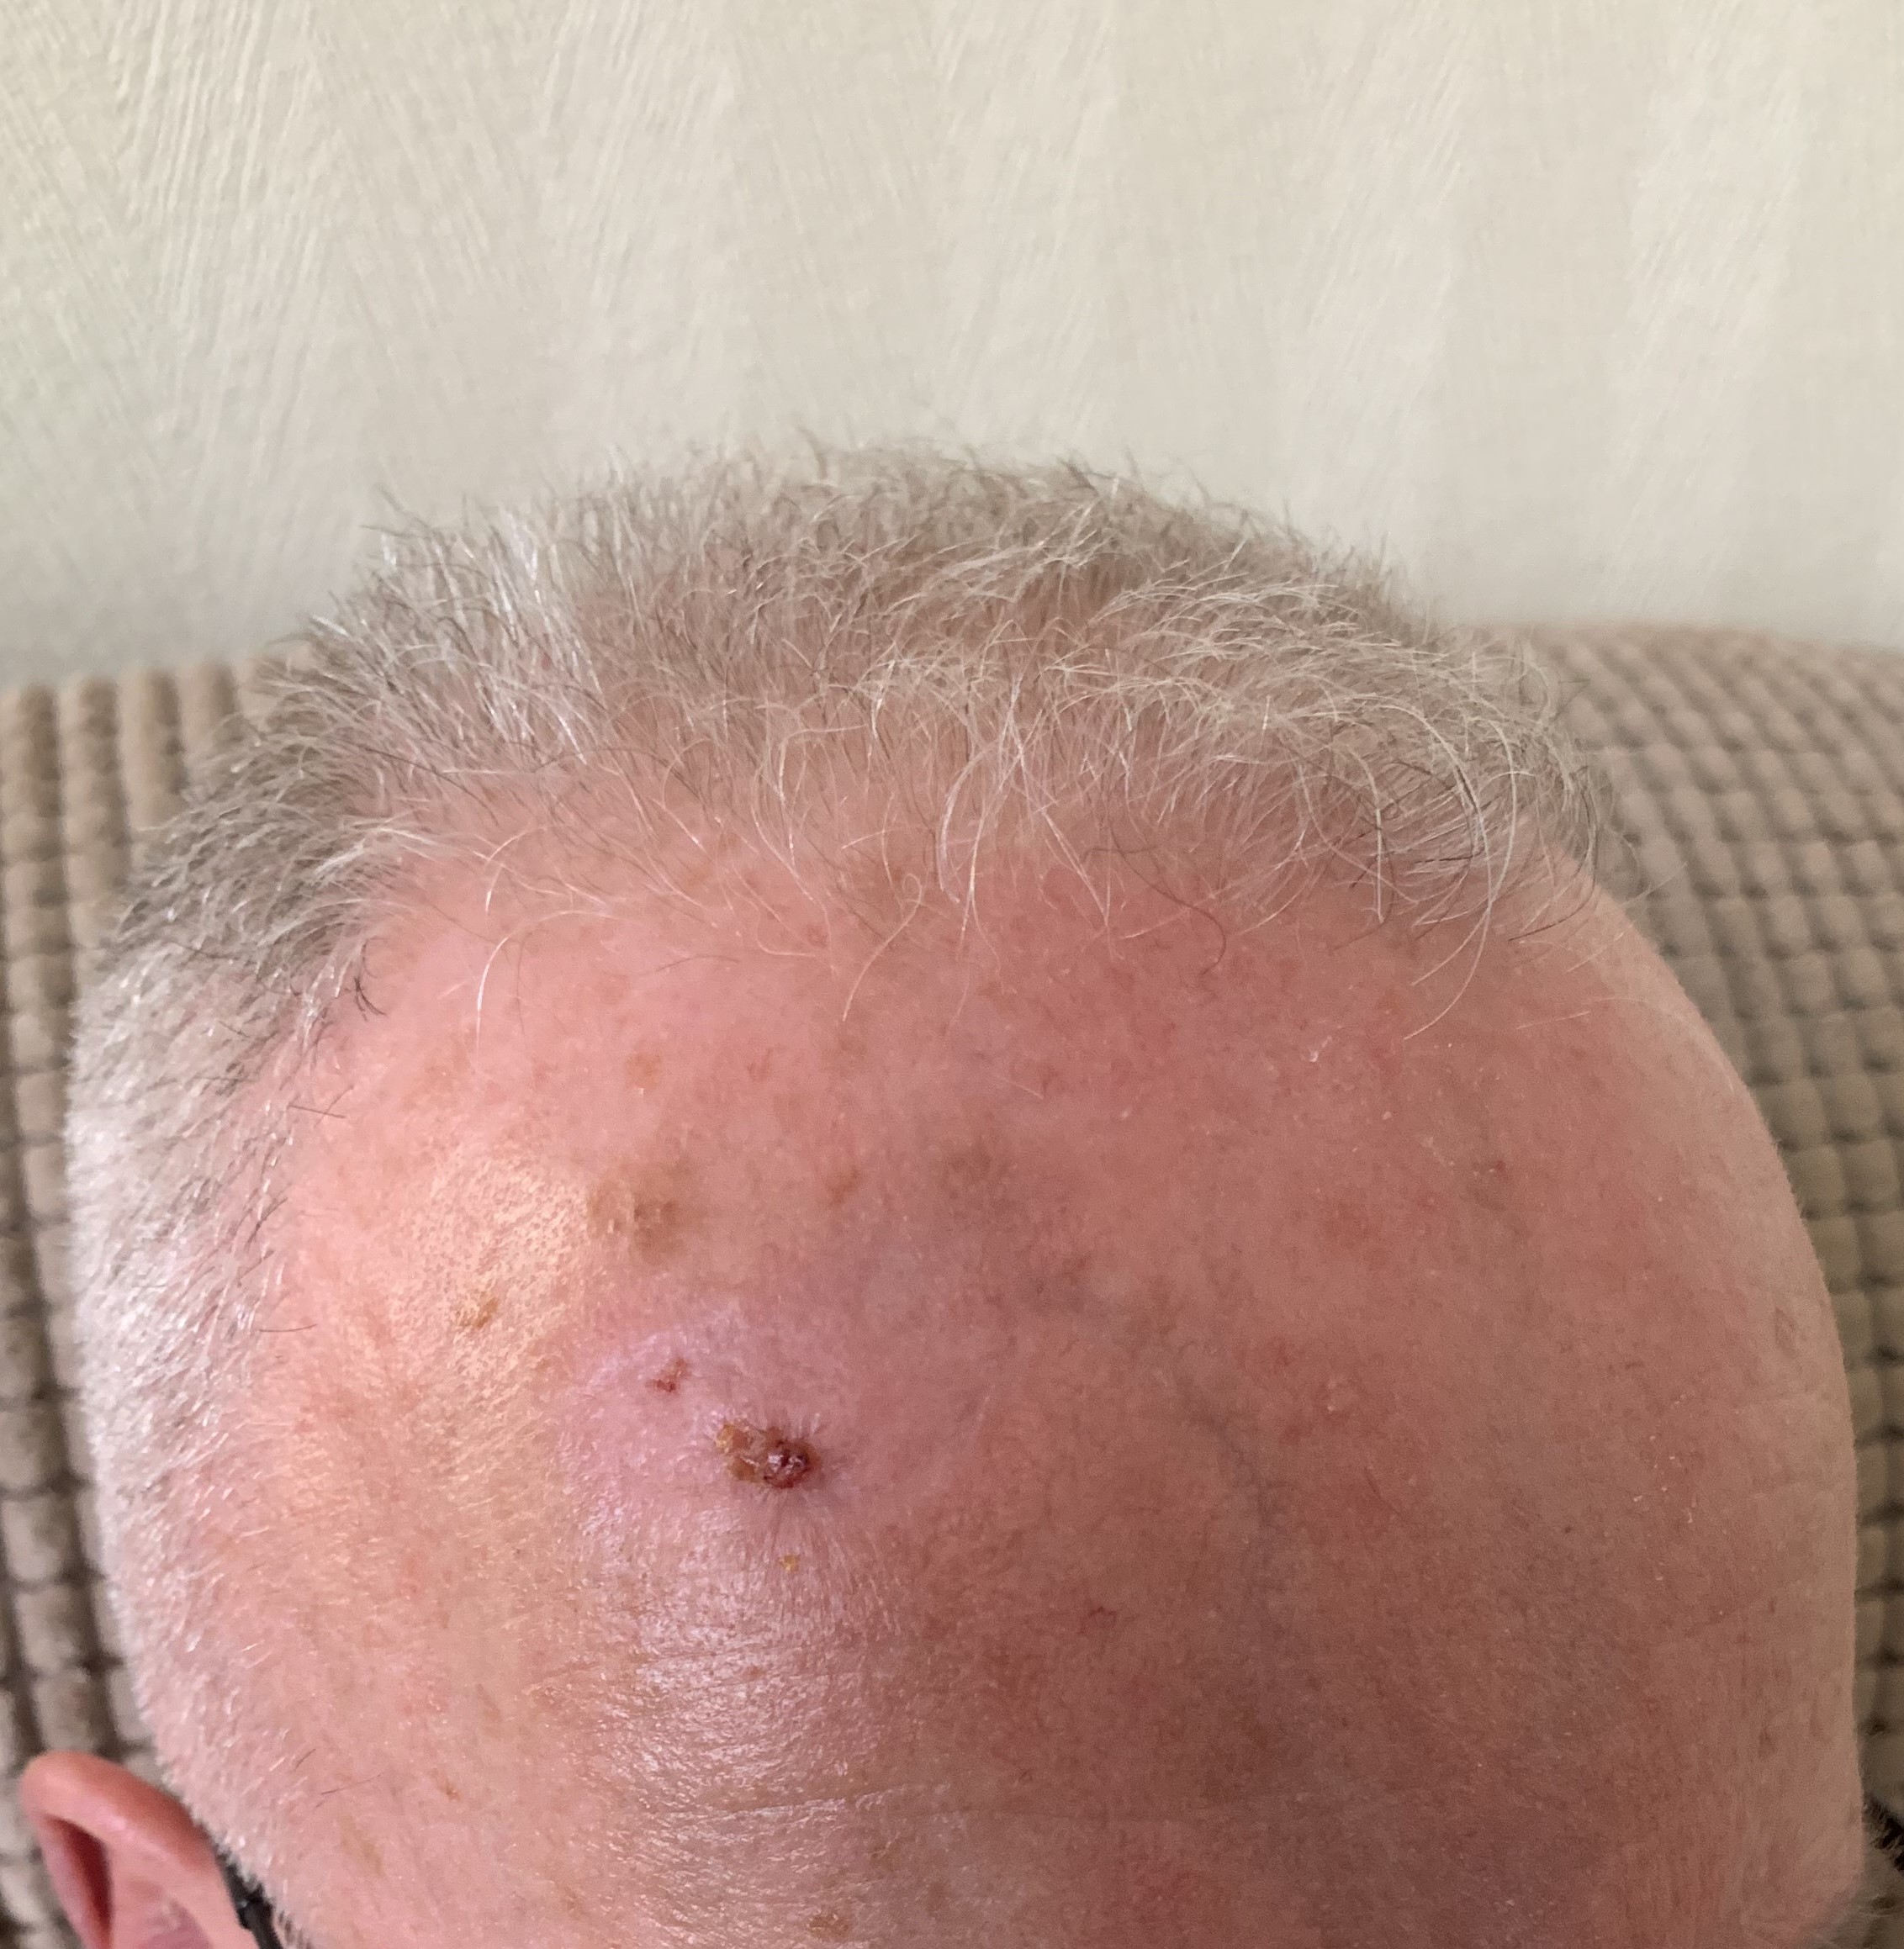 3 weeks post Keratosis removal performed by Dr Javier Montero at our Christchurch Family Medical Practice.